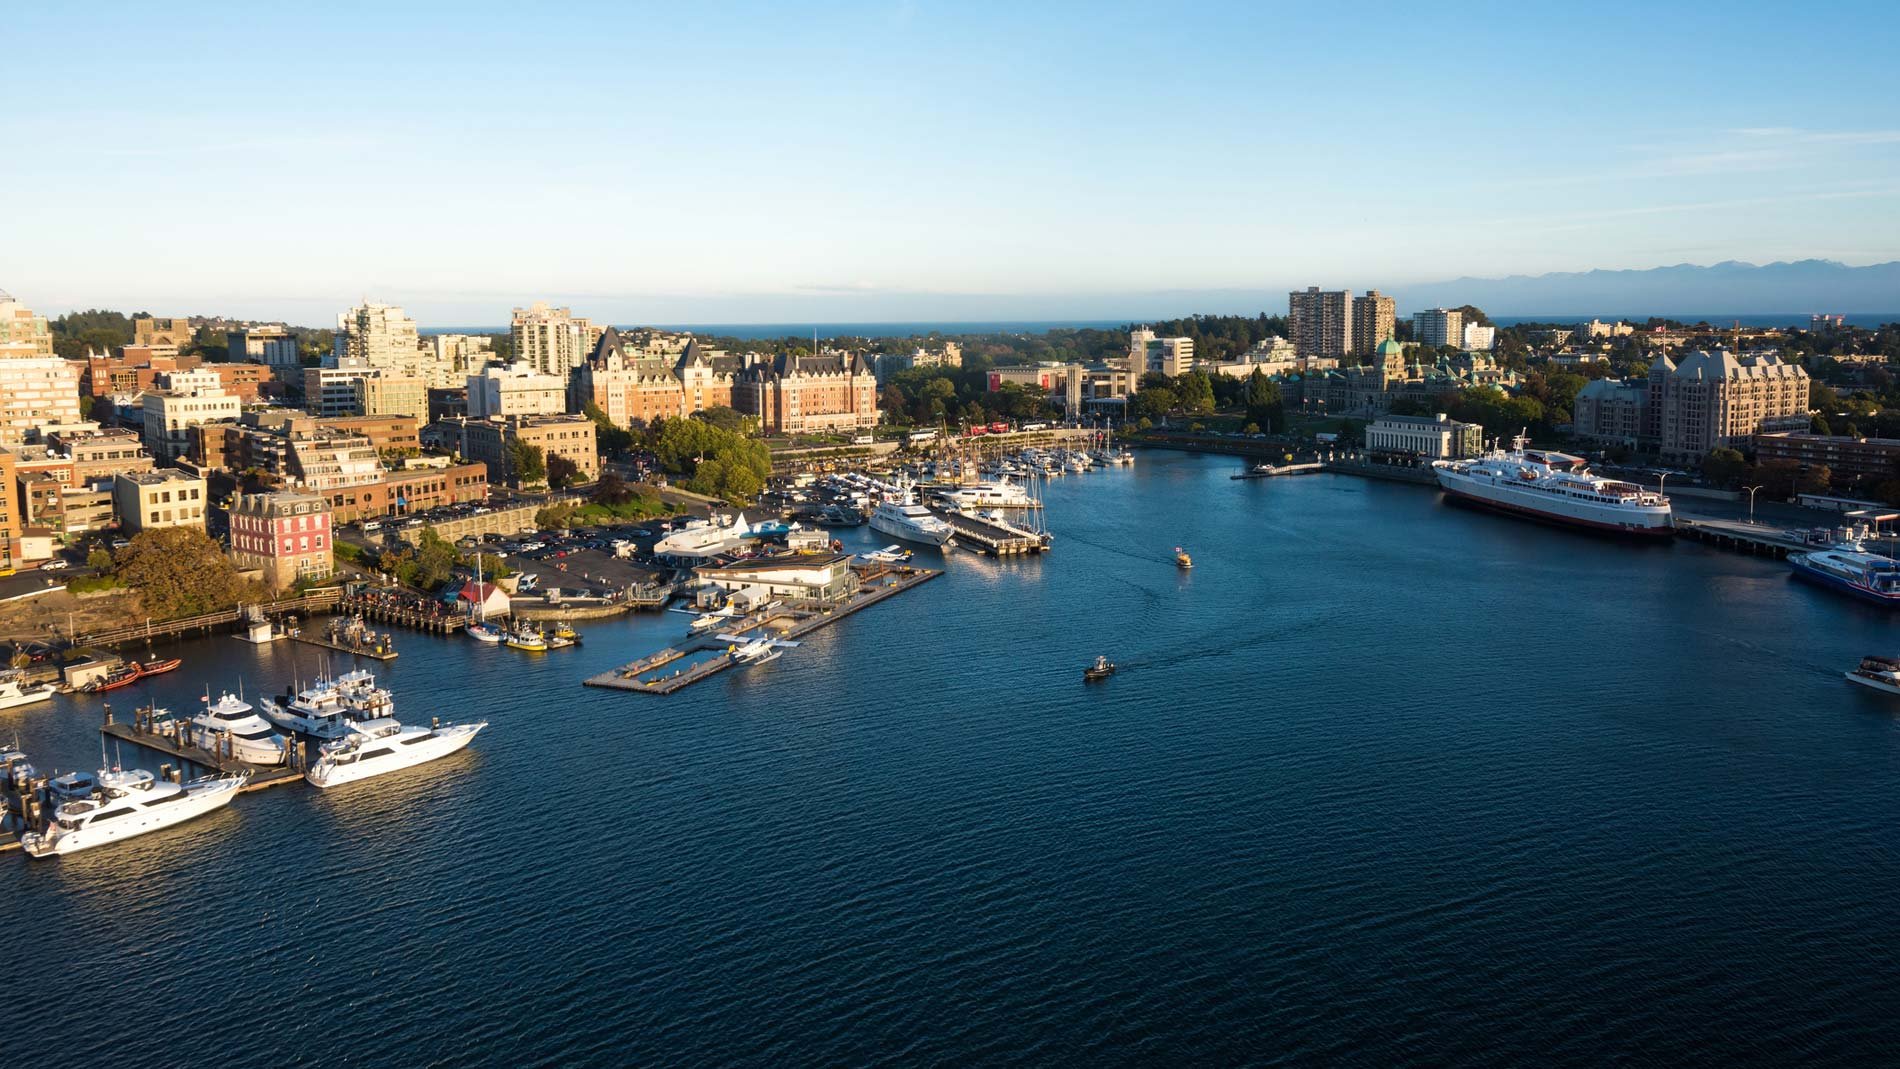 The harbour during the day in Victoria, British Columbia